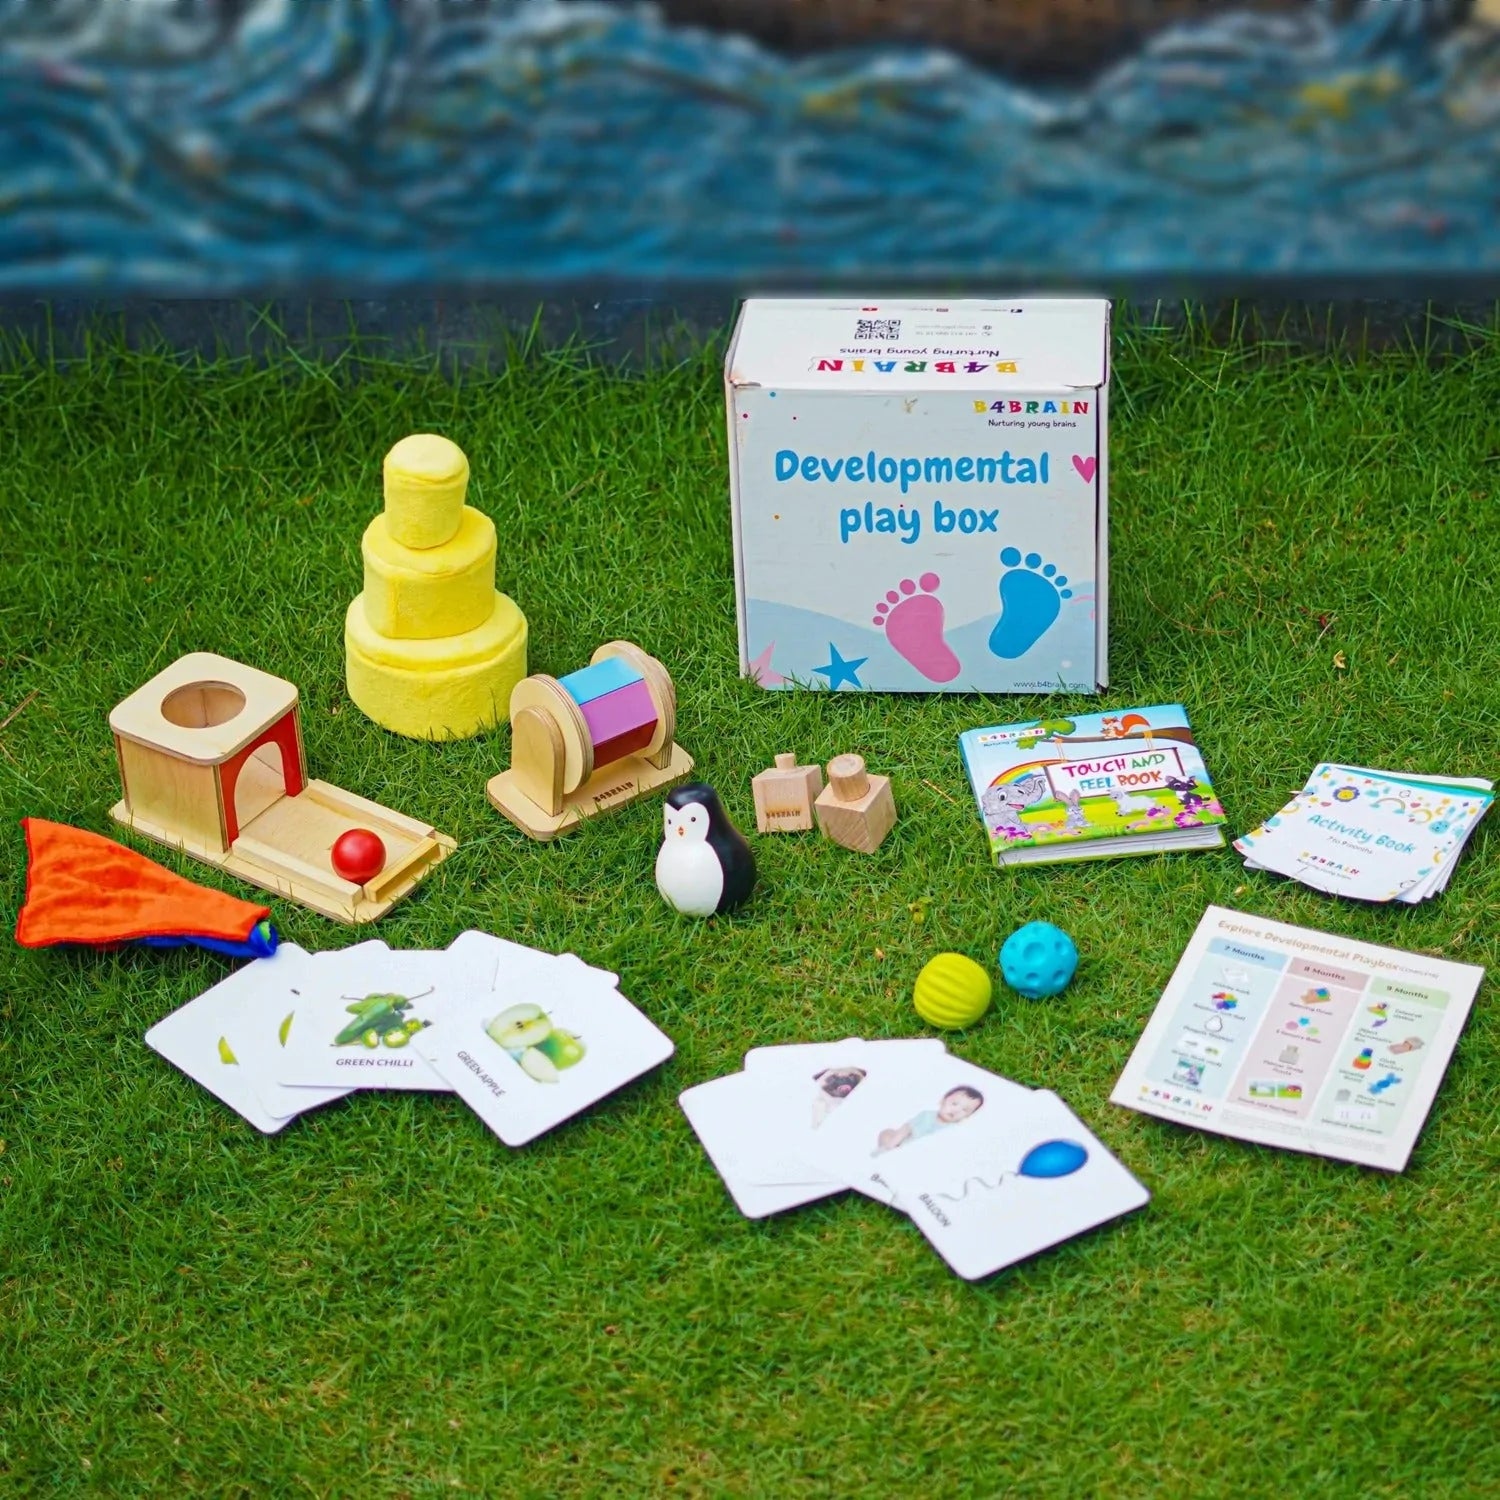 Buy Essential Playbox for 7-9 Months Babies - SkilloToys.com